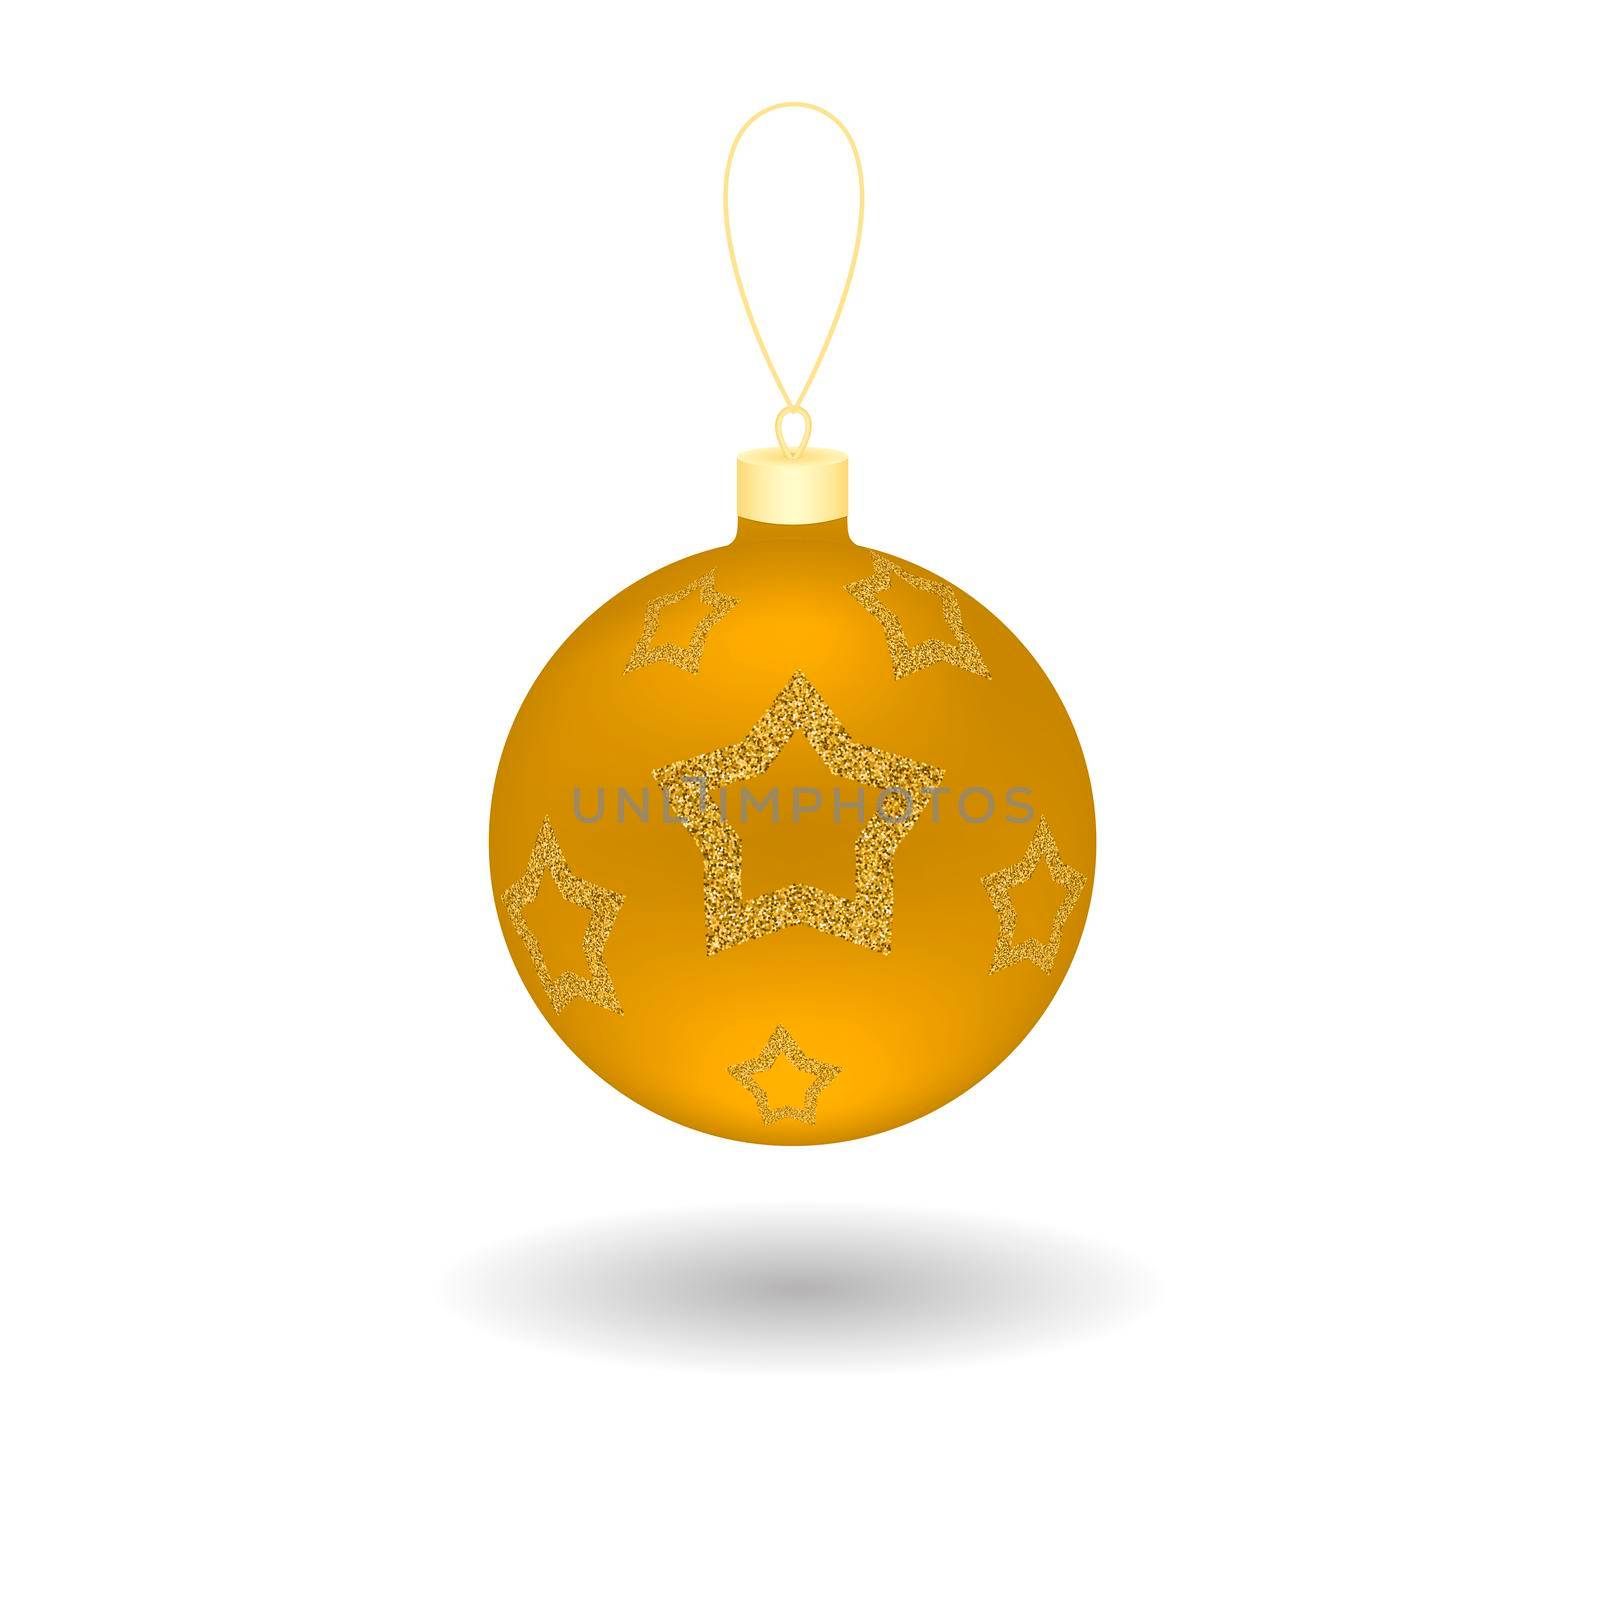 Yellow realistic christmas ball with glitter pattern. illustration isolated on white background for design of greeting cards, banners, flyers and much more.